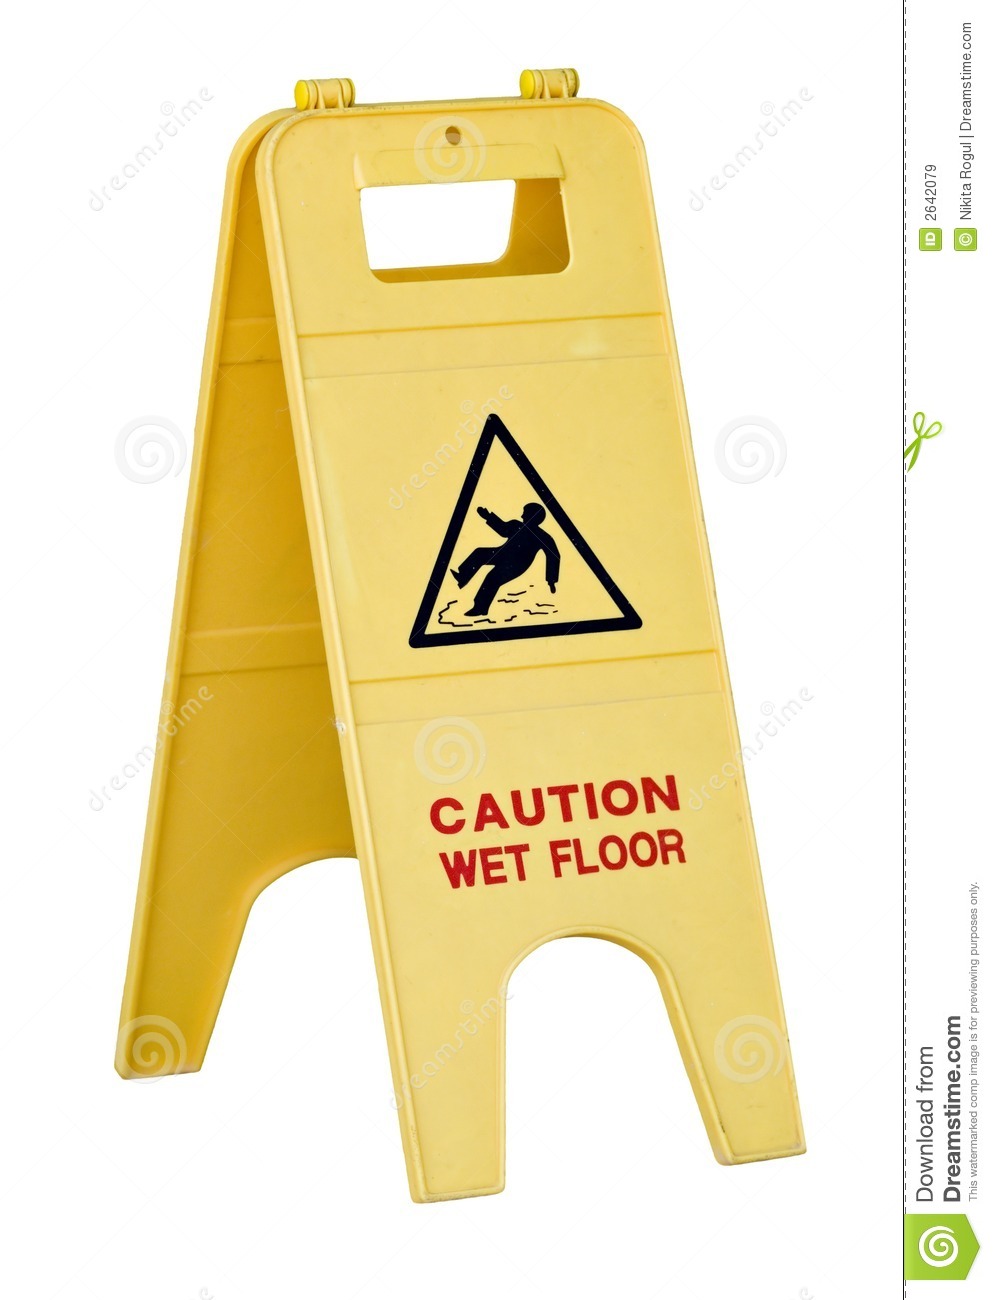 Wet Floor Sign Royalty Free Stock Images   Image  2642079